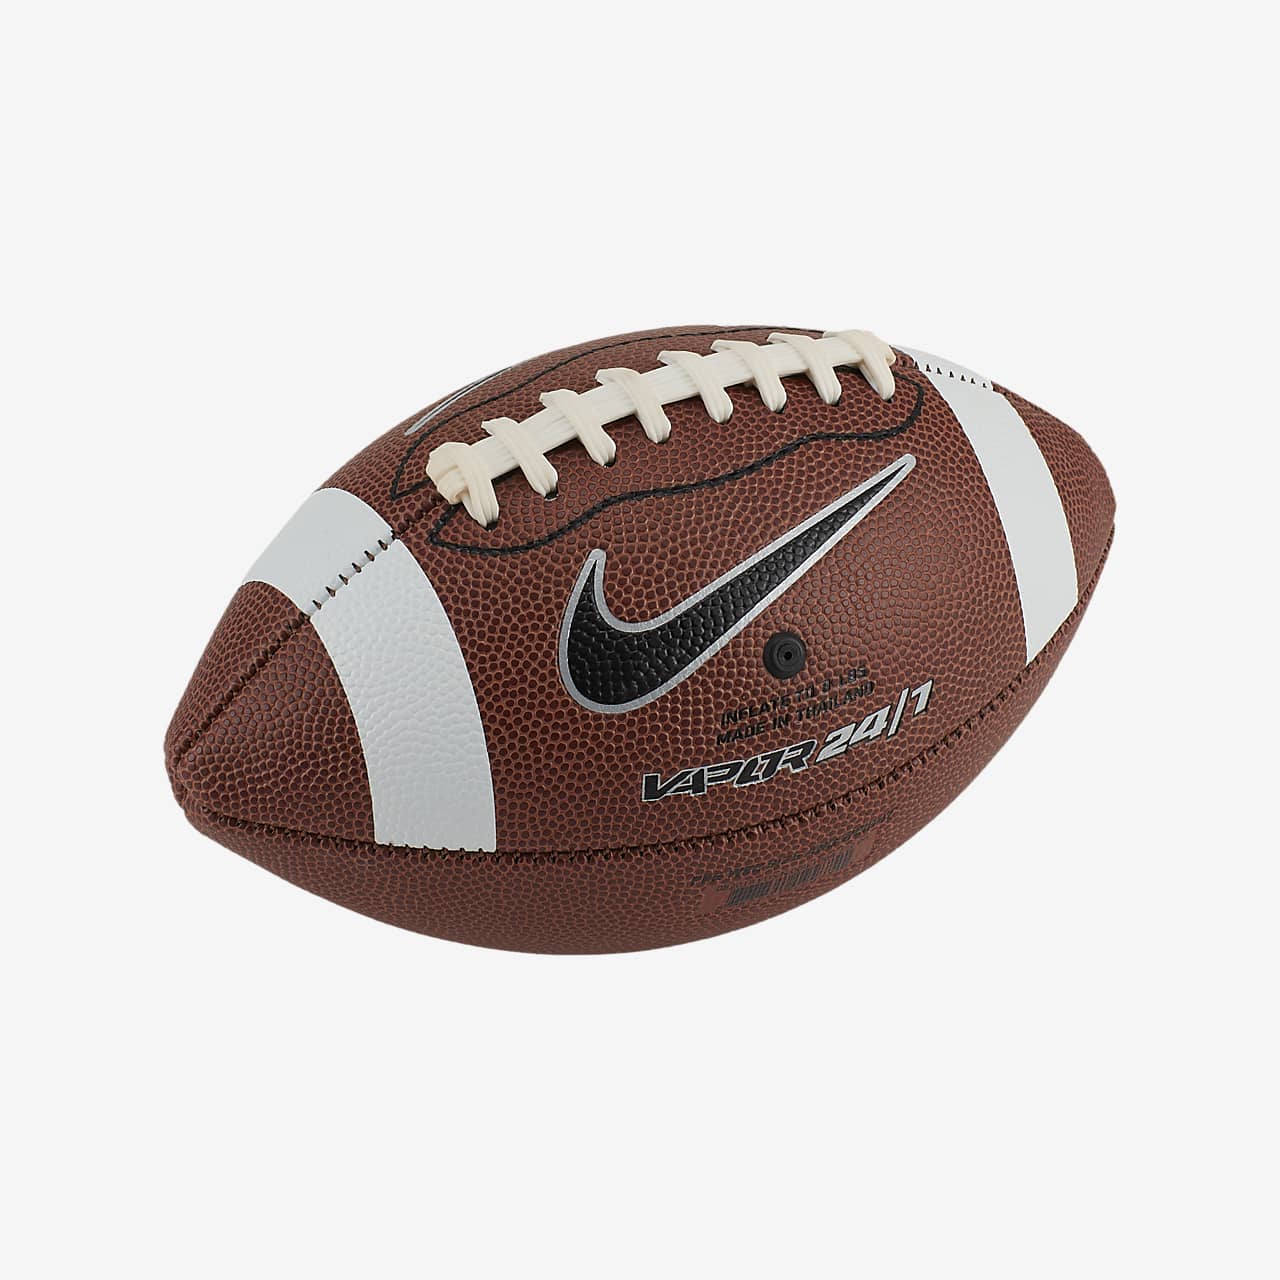 nike football official size